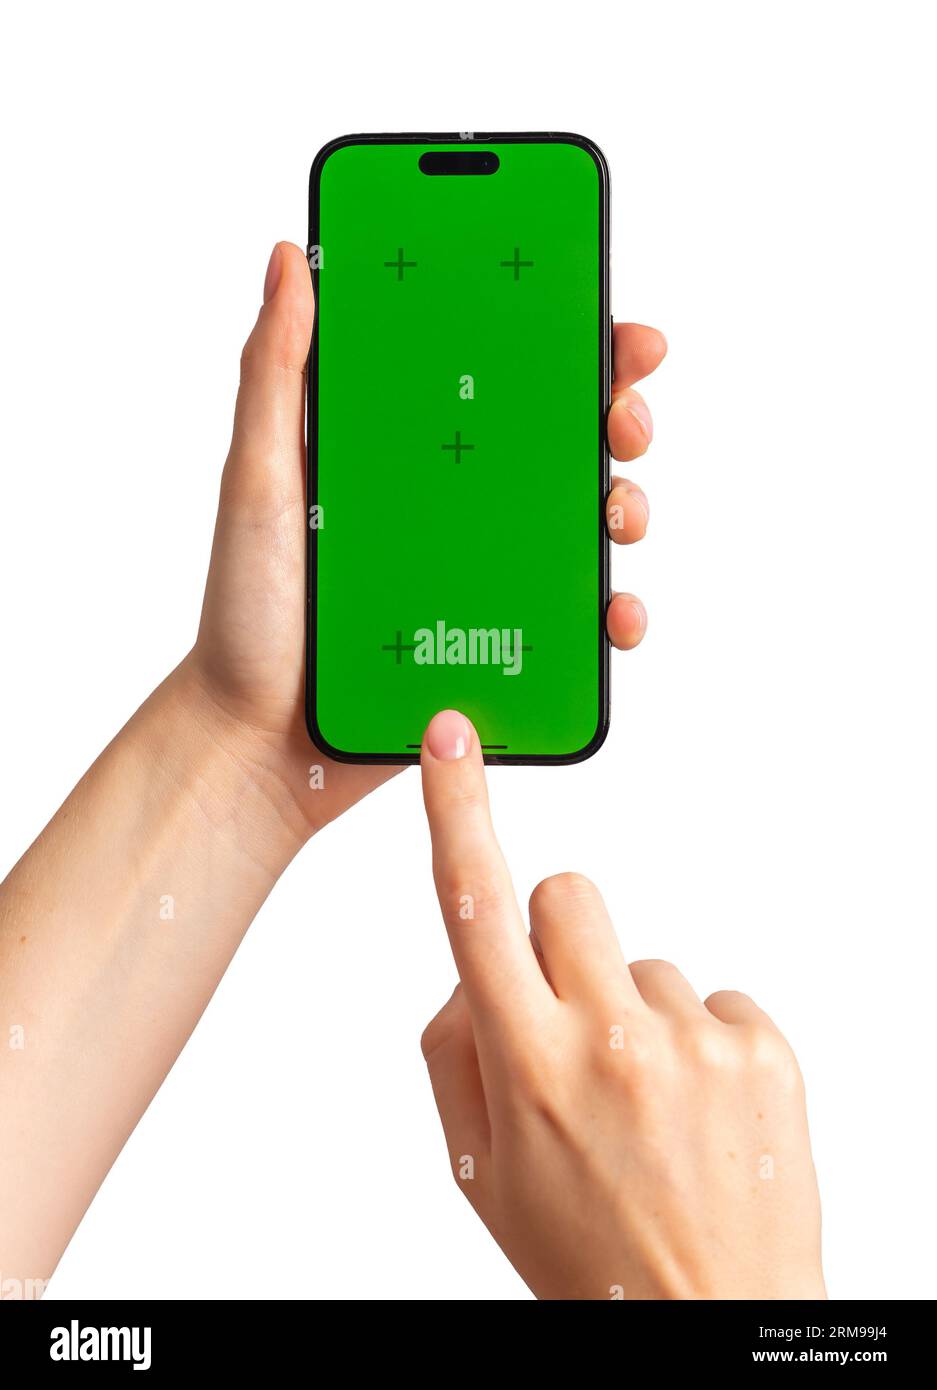 Finger clicking tapping on green phone screen, smartphone mockup, isolated on white background. Stock Photo